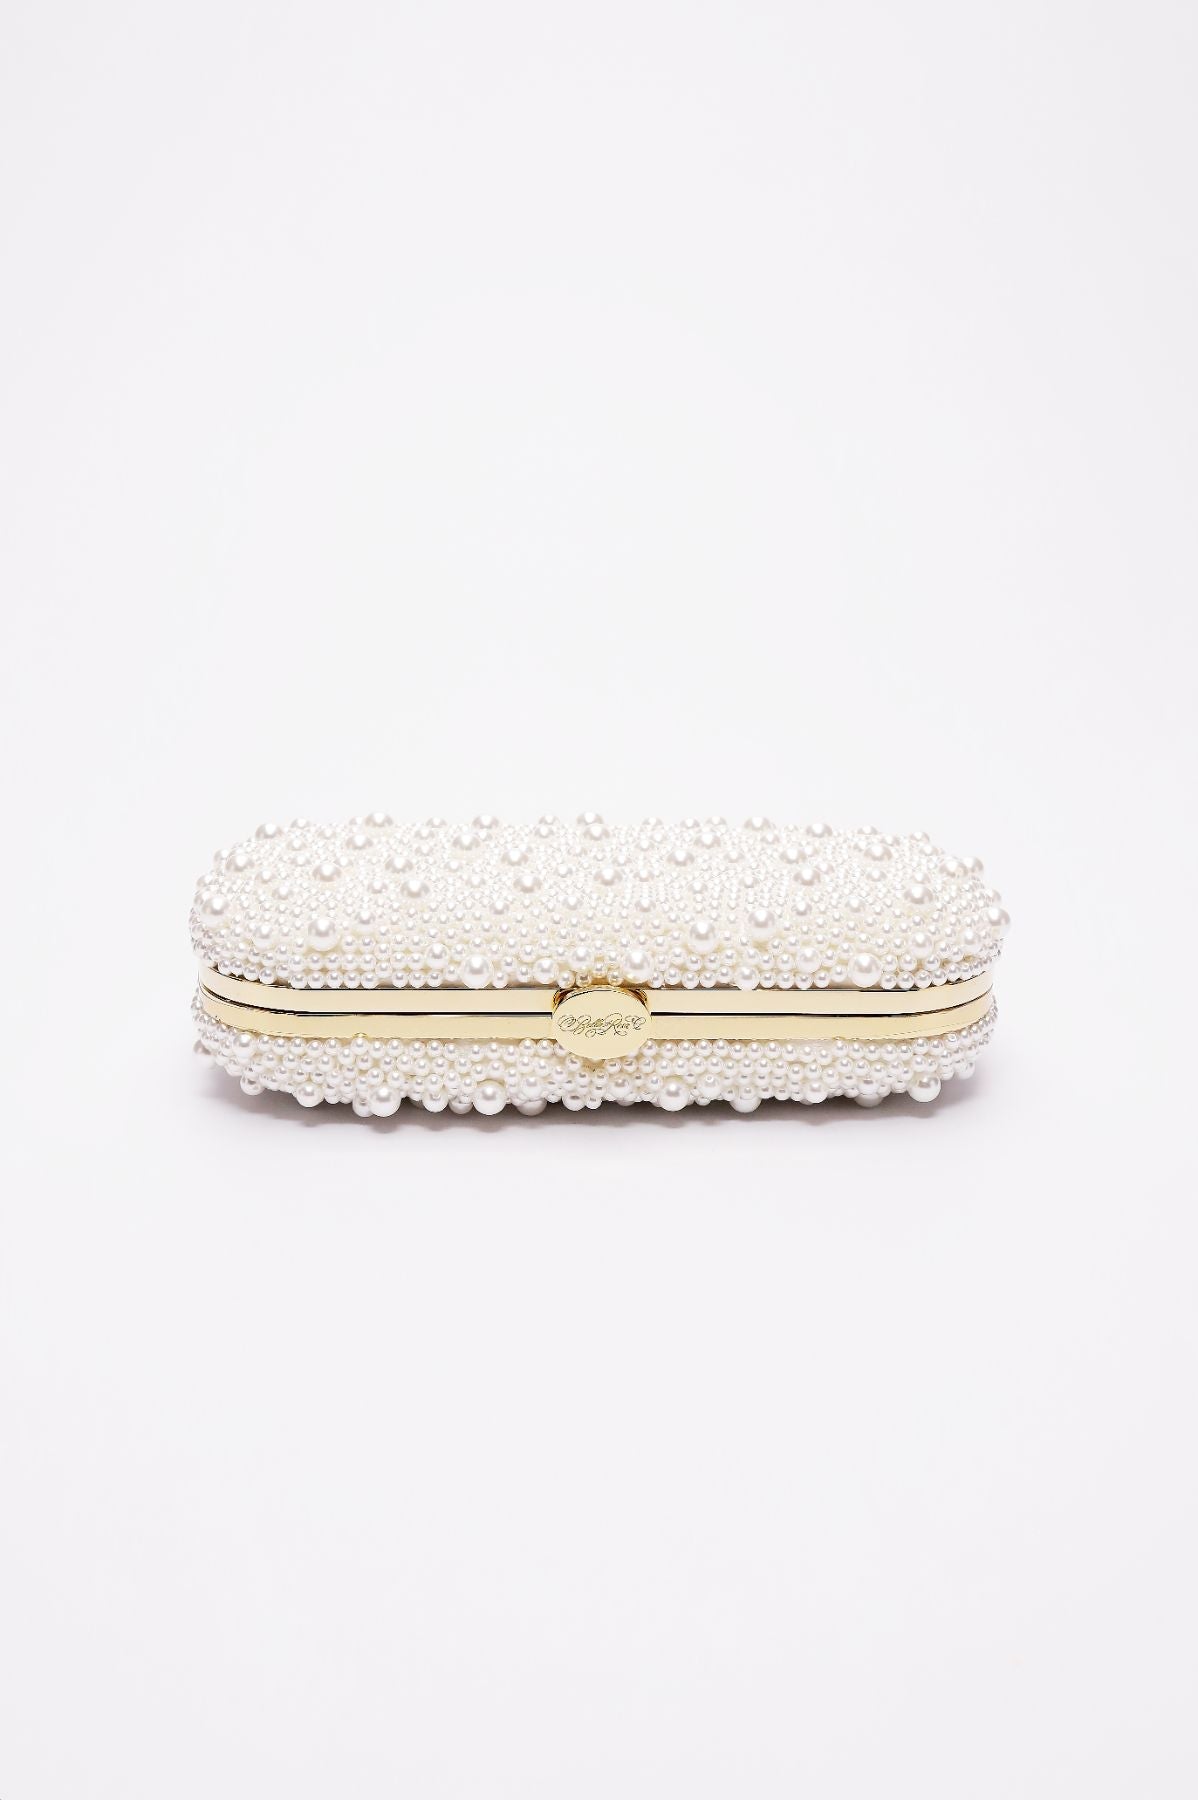 Bella Rosa Collection&#39;s True Love Pearl Petite clutch bag with a gold clasp against a plain background.